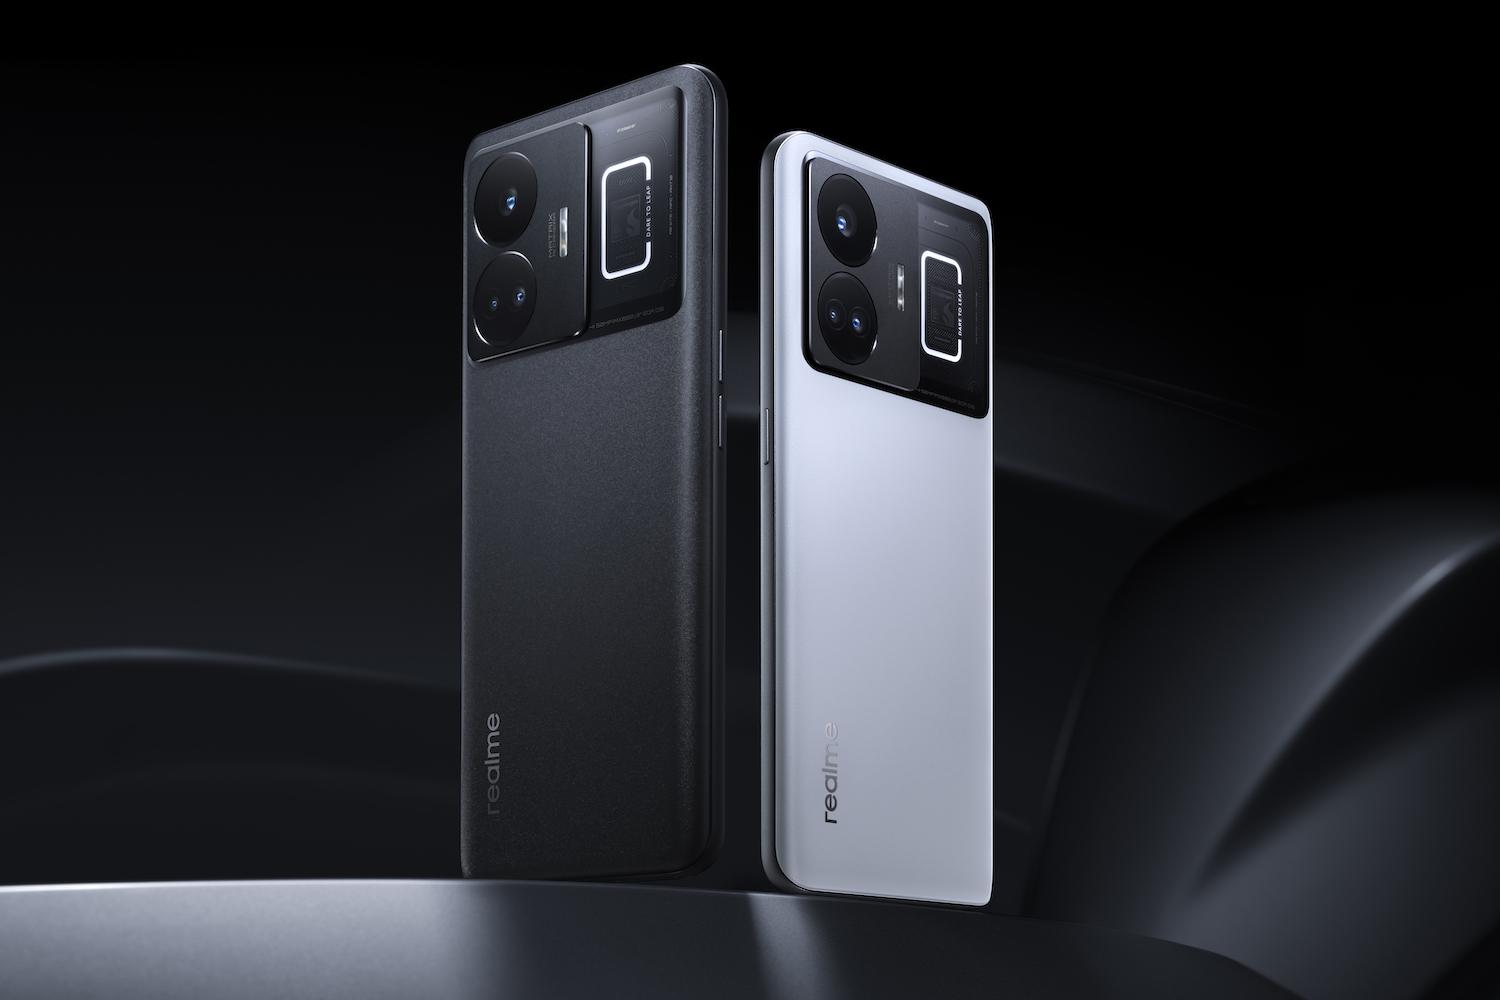 The back of the Realme GT3 phone, in black and white colors.